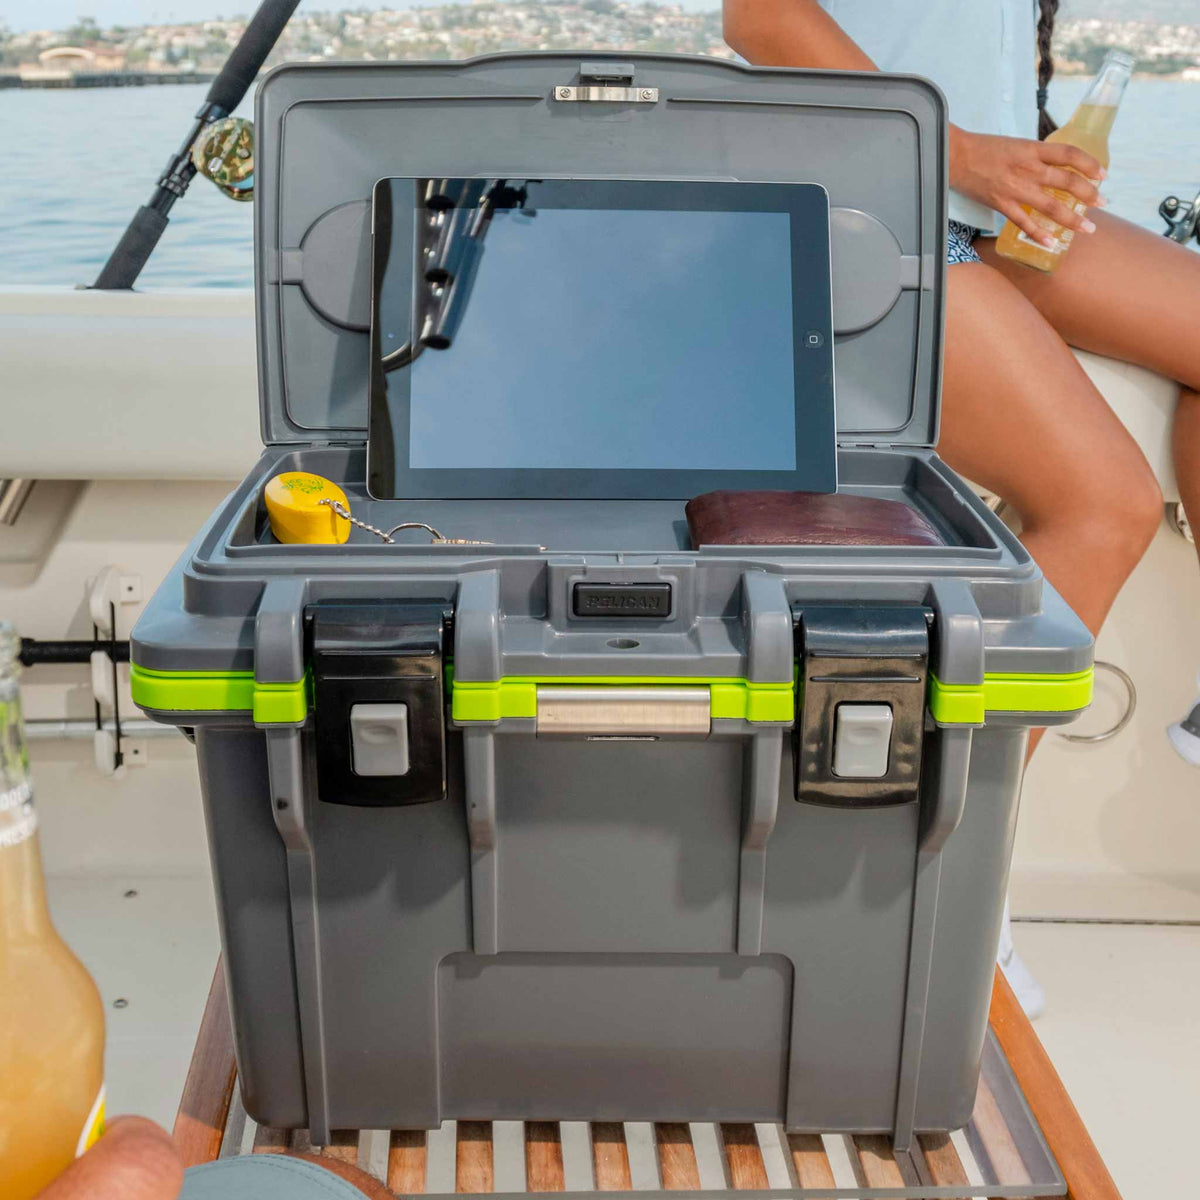 14QT Personal Pelican Cooler being used on a boat with the dry box lid opened 